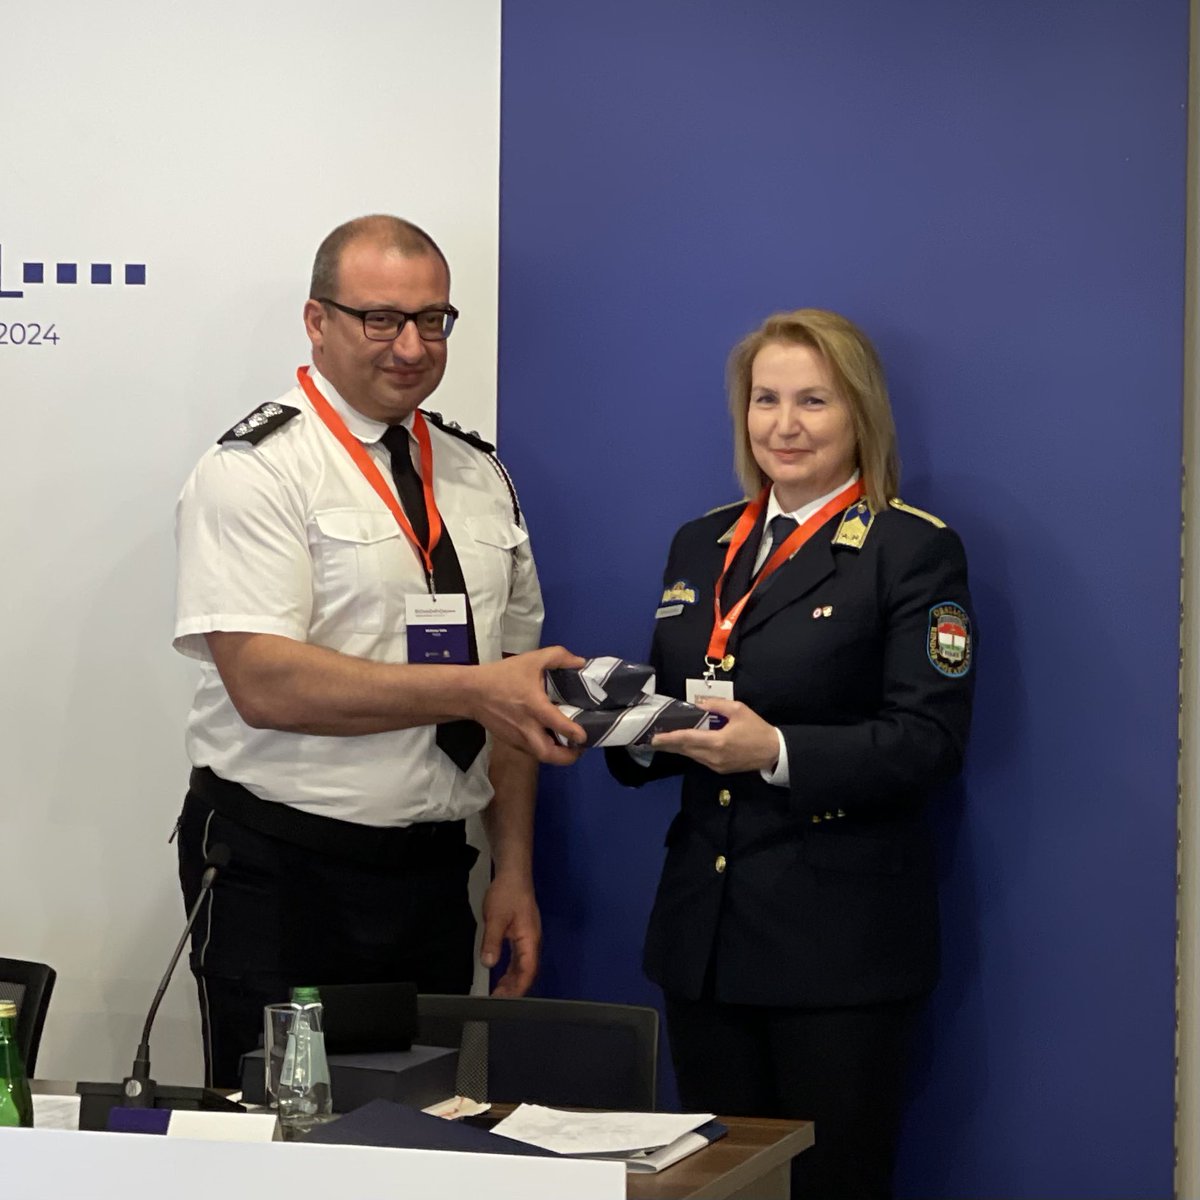 👮‍♀️👮‍♂️ Key decisions taken at ROADPOL Council today to boost the network & make it more efficient to carry on the fight for road safety Thanks 🇲🇹 @MaltaPolice & 🇲🇹@byroncamilleri who were honoured with the special sign of ROADPOL by President 🇭🇺 @ElviraZsinkai #roadsafety #police